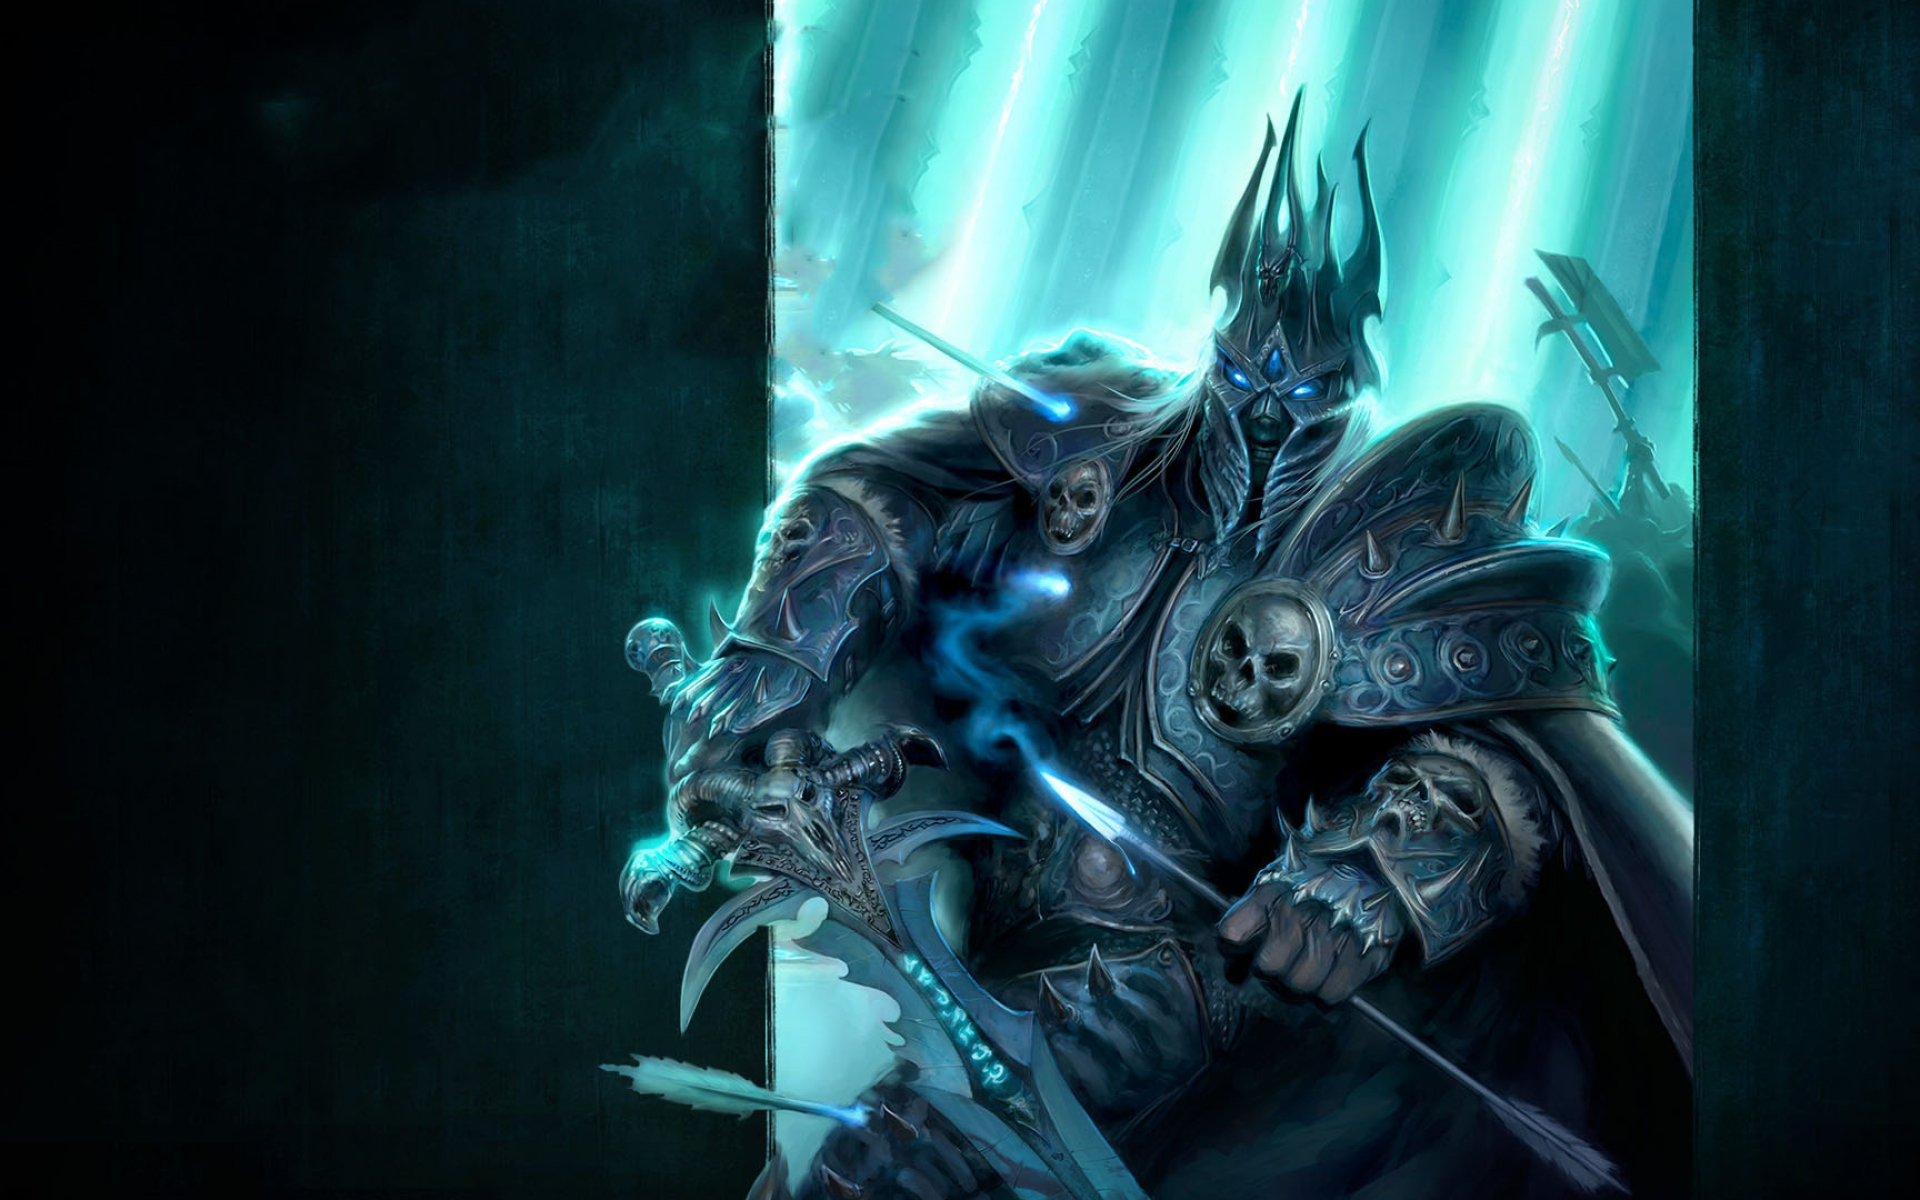 Lich King, World of Warcraft, Wrath of the Lich King, Game wallpapers, 1920x1200 HD Desktop